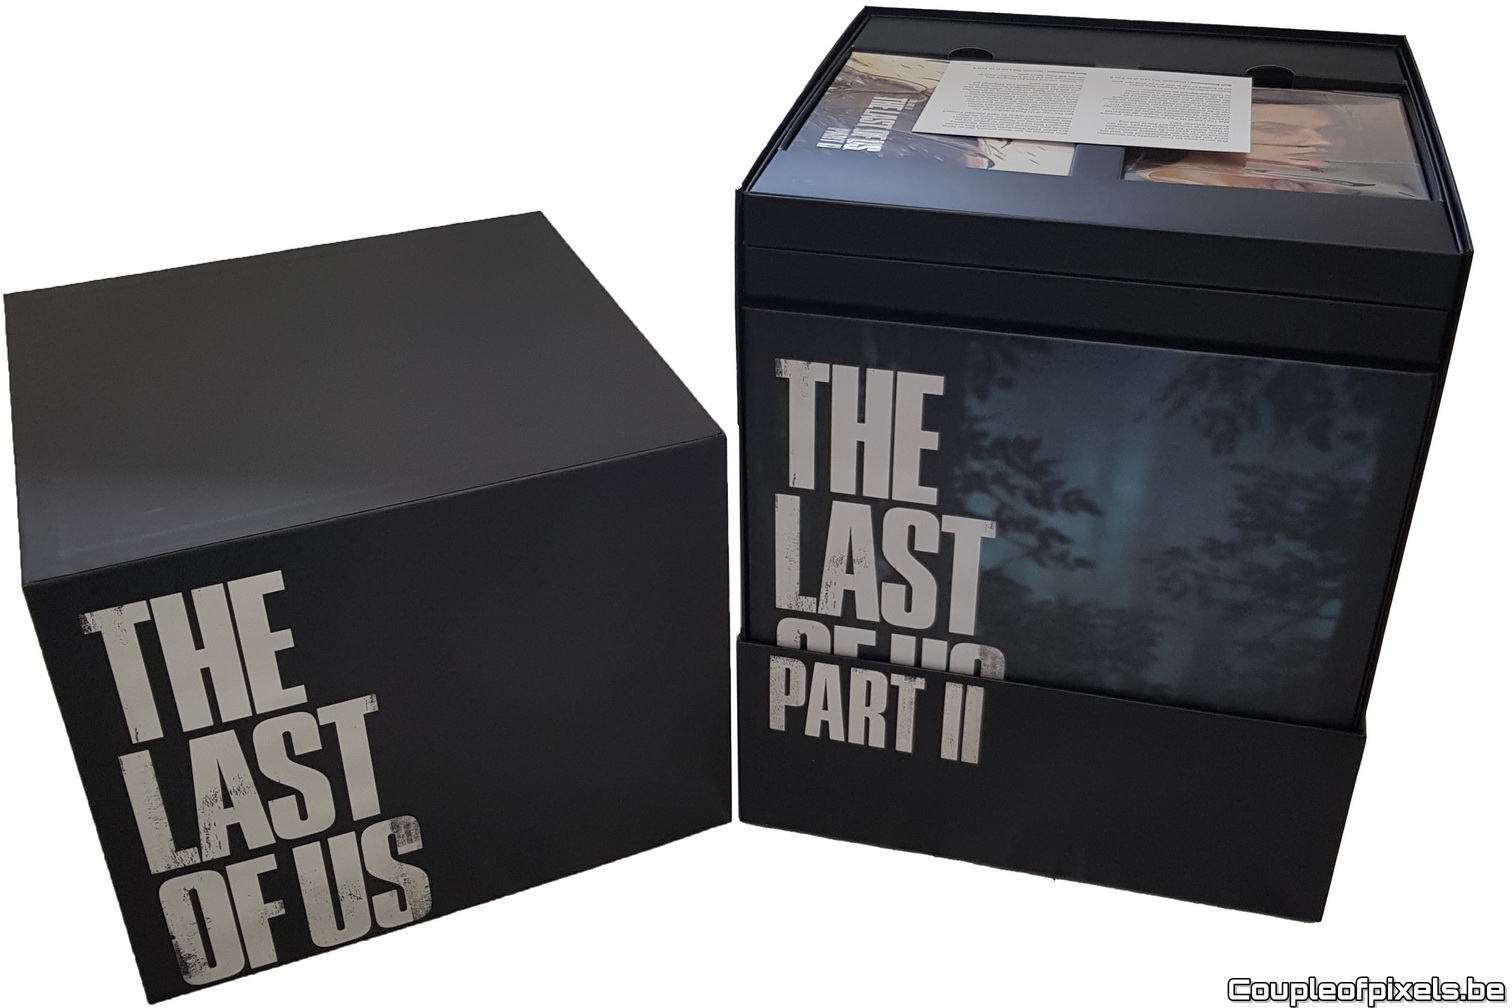 The Last of us 2 collector unboxing